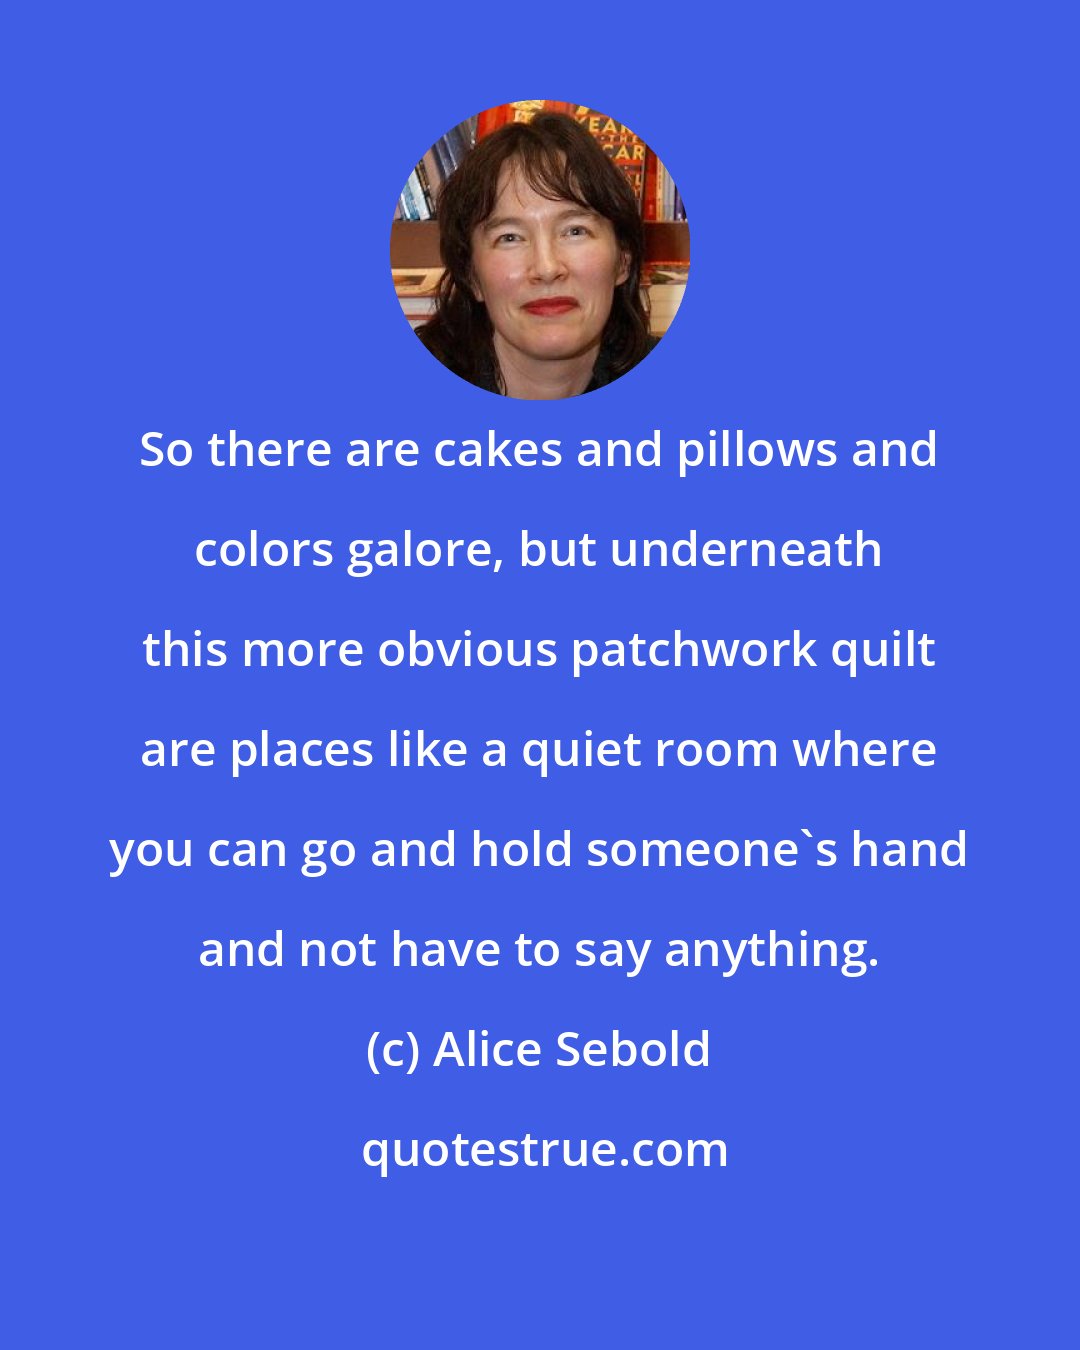 Alice Sebold: So there are cakes and pillows and colors galore, but underneath this more obvious patchwork quilt are places like a quiet room where you can go and hold someone's hand and not have to say anything.